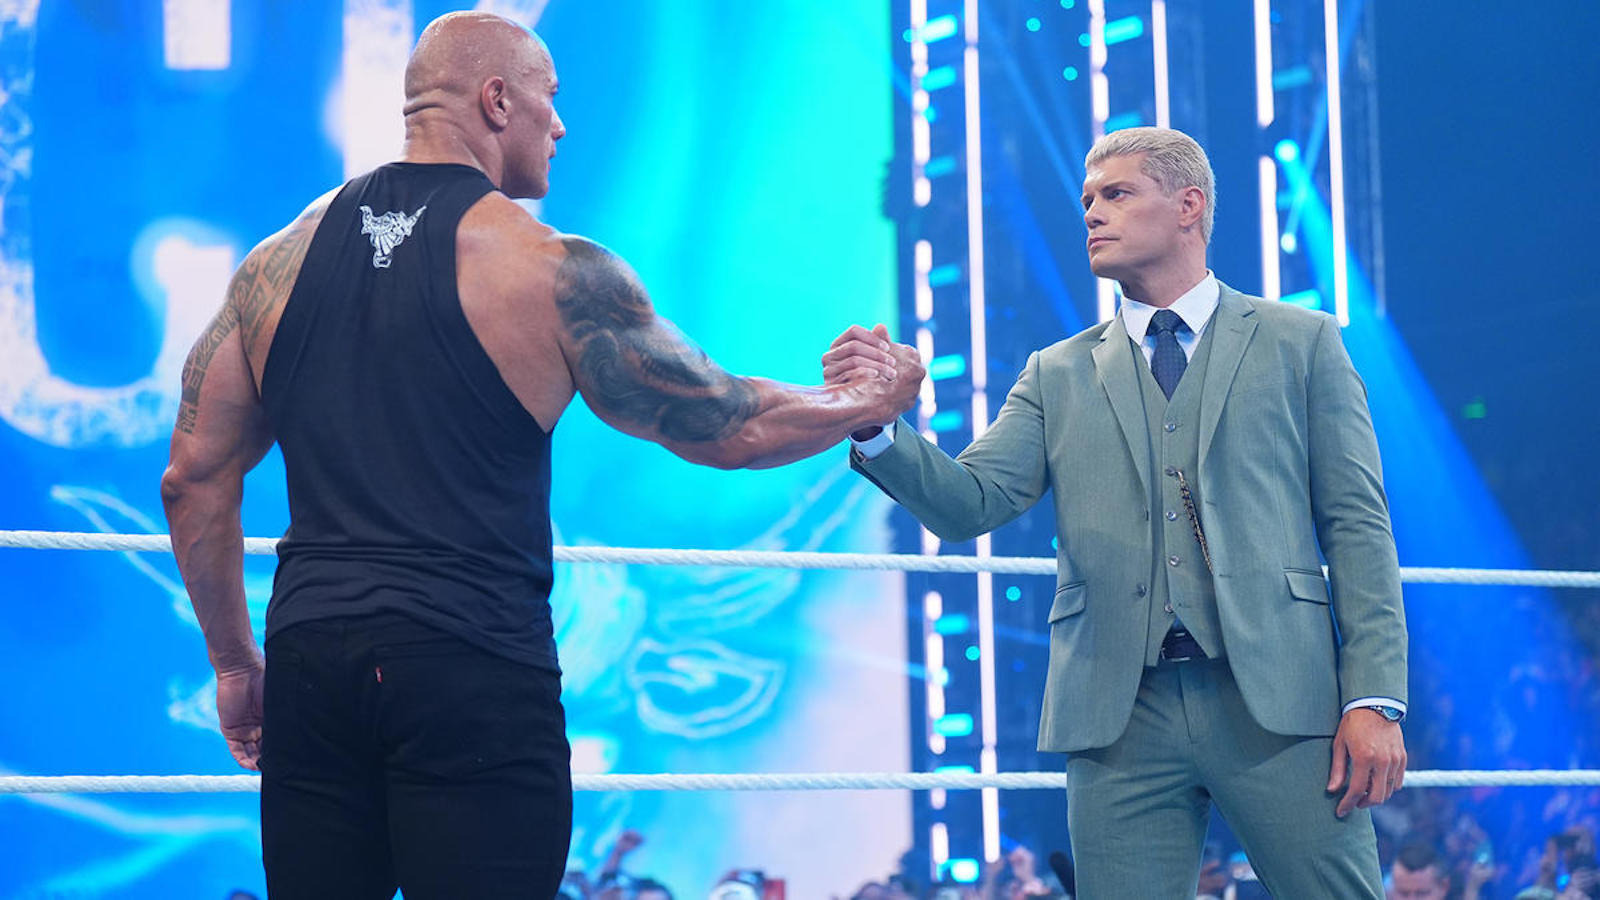 Cody Rhodes To Appear On Next Three Episodes Of WWE SmackDown, All Alongside The Rock